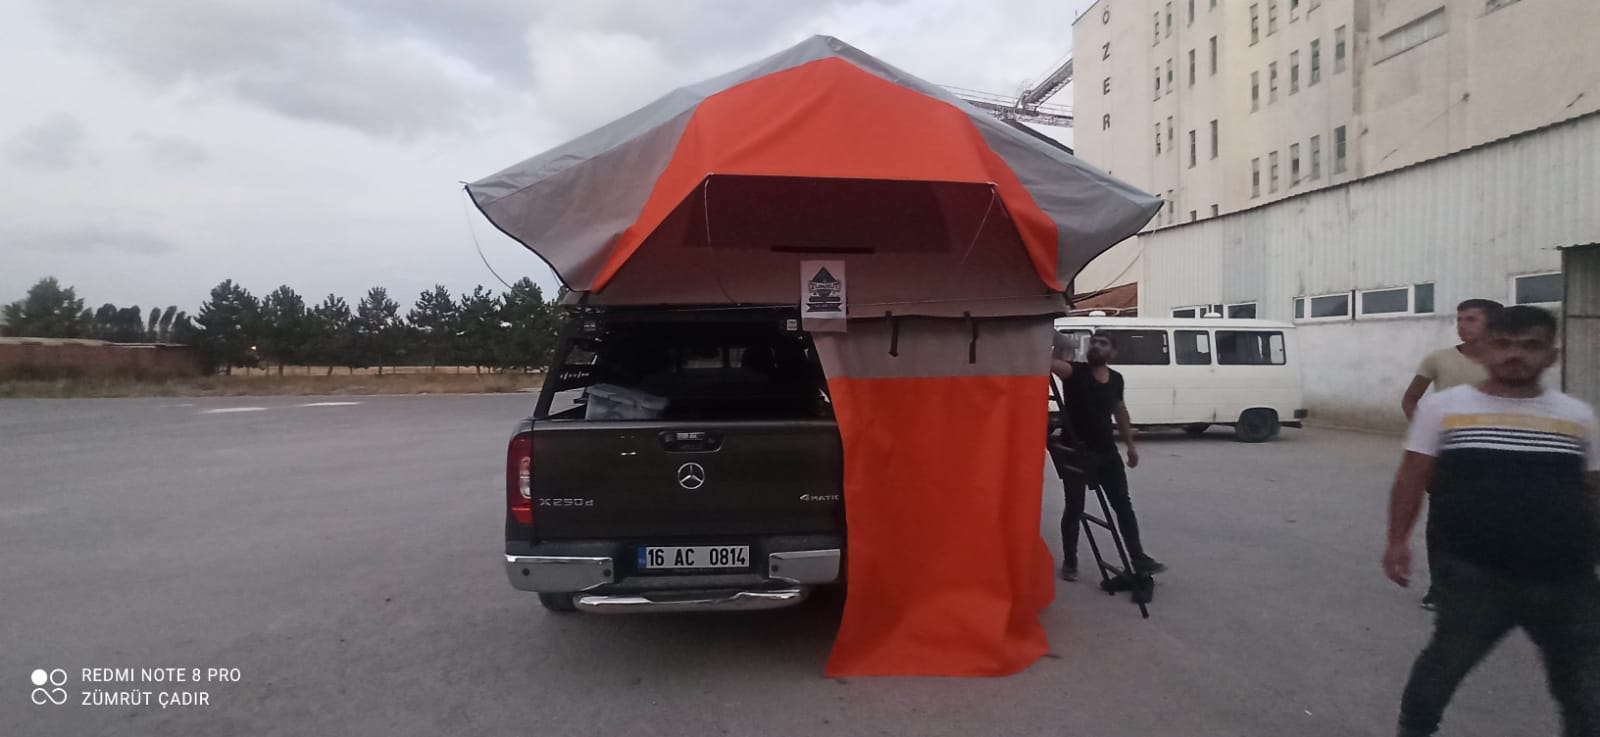 Rooftop Tents:All Season with Rainfly Shoes Bag Ladder 2+1 Pax Large Door High Density Mattress-2